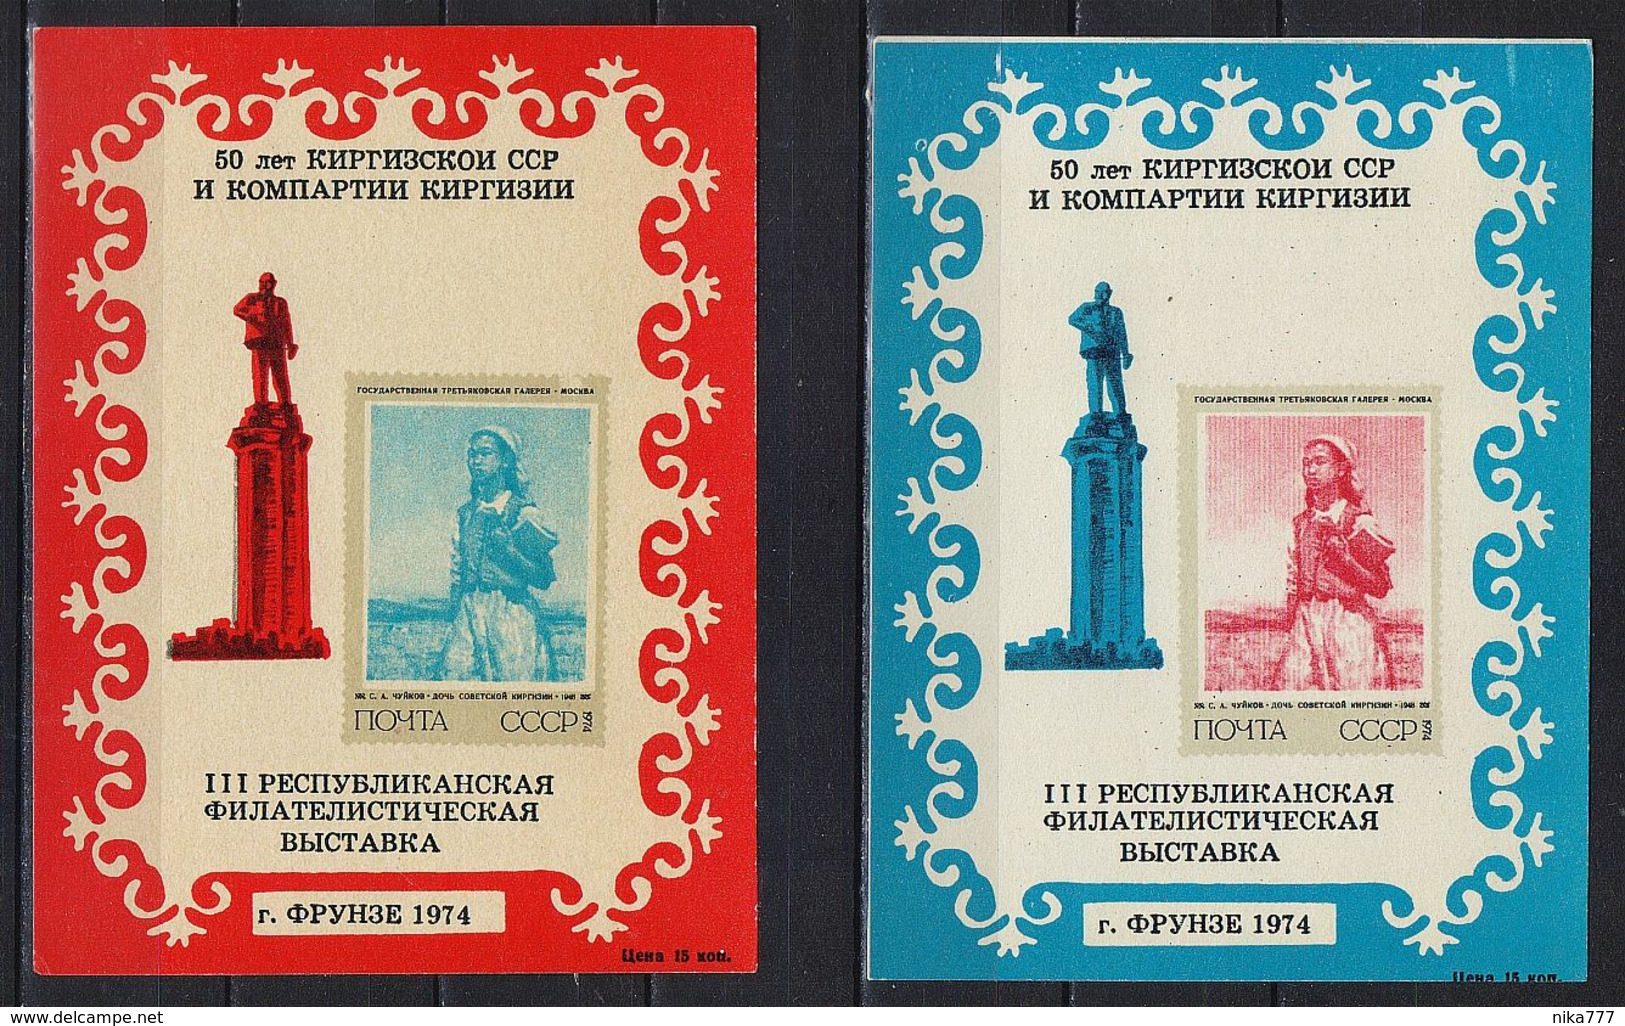 STAMP USSR RUSSIA Mint Block BF ** Local 2 Souvenir Sheets 1974 Poster Exhibition 50 Years Soviet Kyrgyzstan Frunze - Local & Private